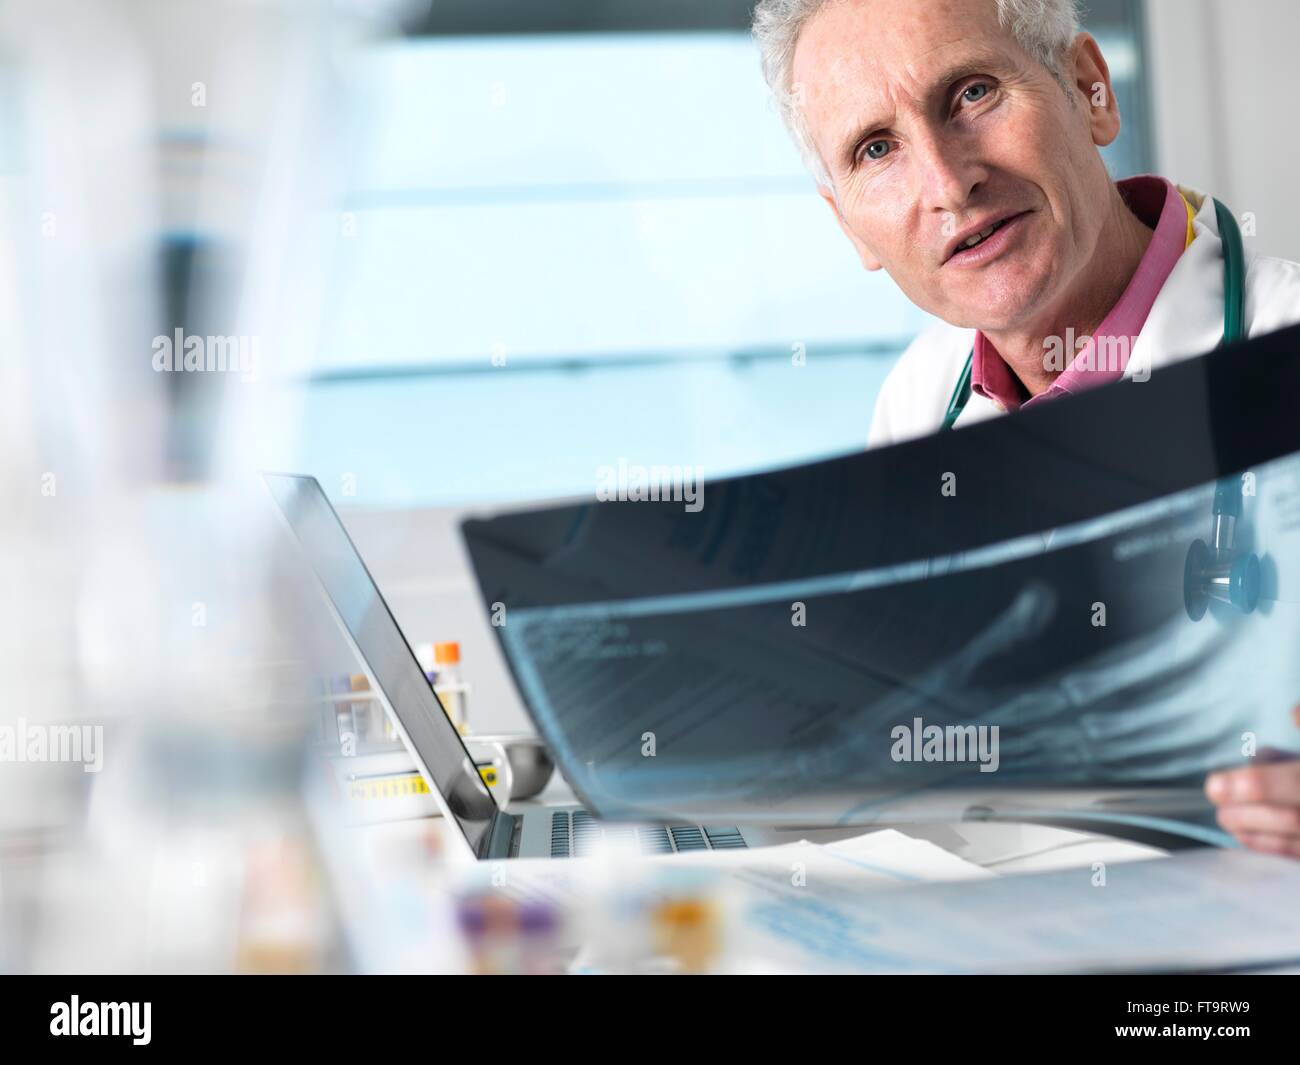 PROPERTY RELEASED. MODEL RELEASED. Doctor viewing a X-ray of a fractured hand in a hospital. Stock Photo